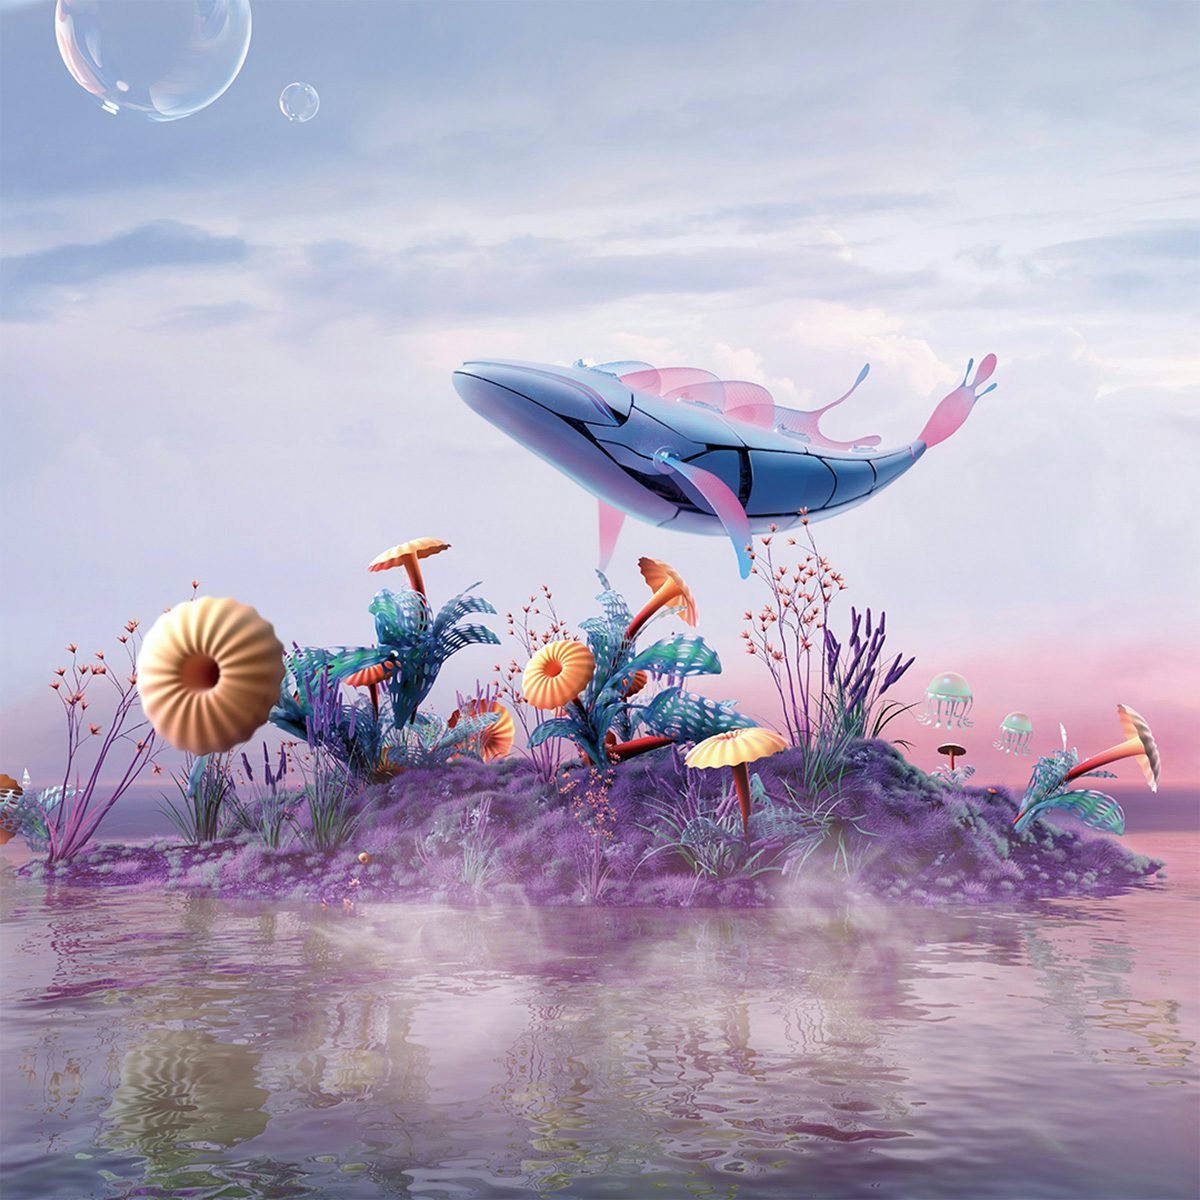 Image shows a CG landscape in a pink, blue and purple palette showing a floating fish and fungi-like plants